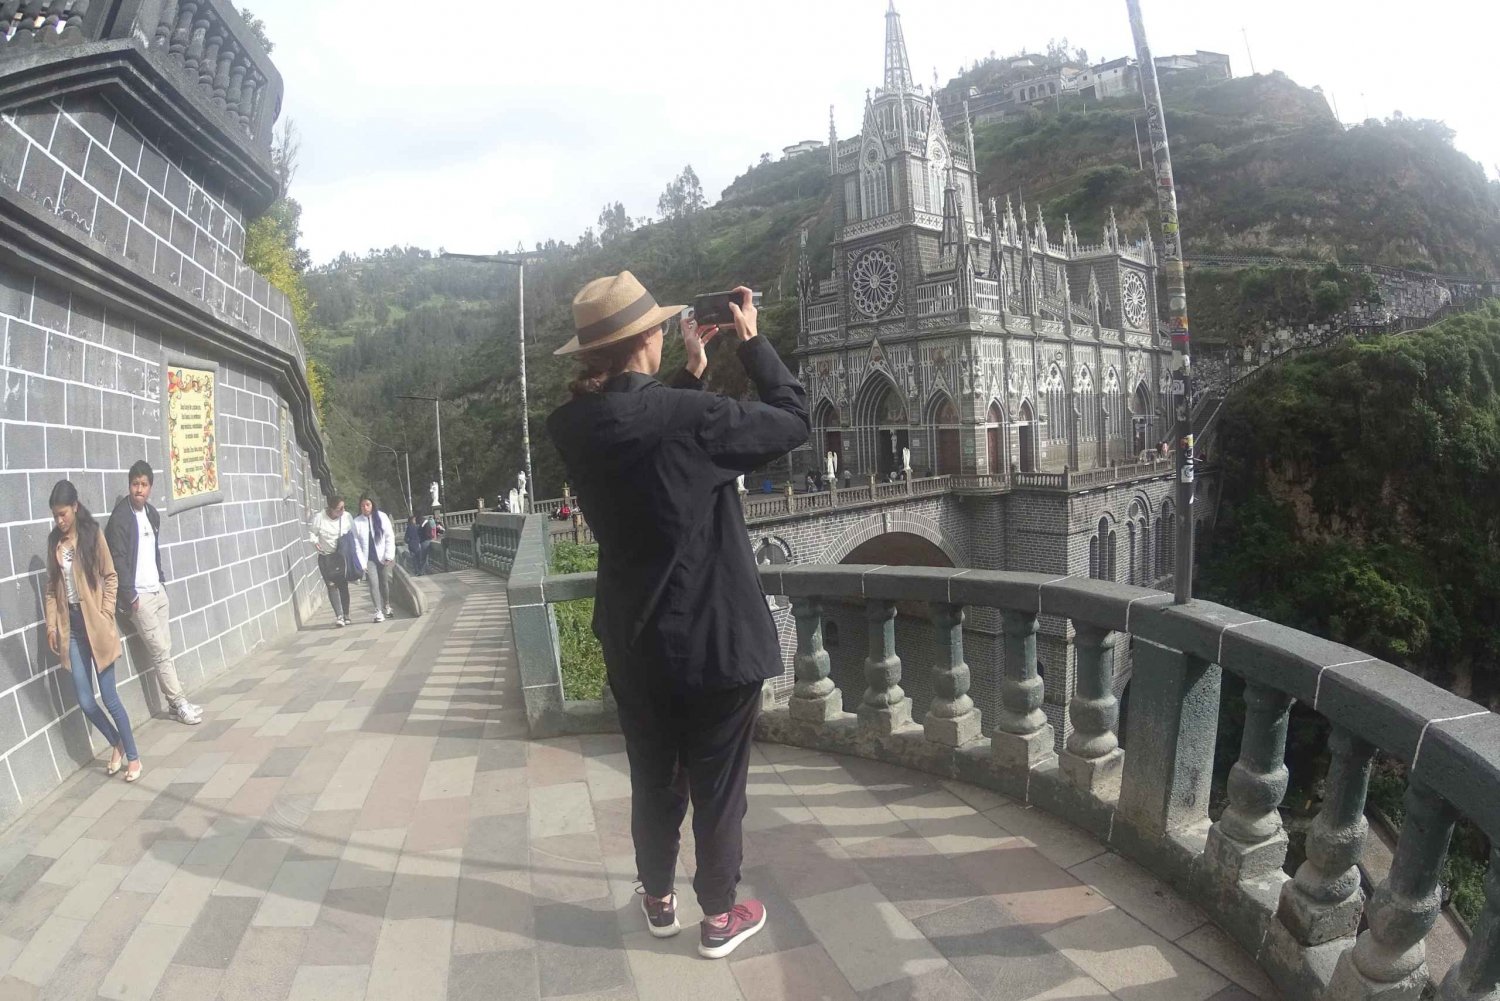 From Quito: Las Lajas Sanctuary Full-Day Tour & Hotel Pickup